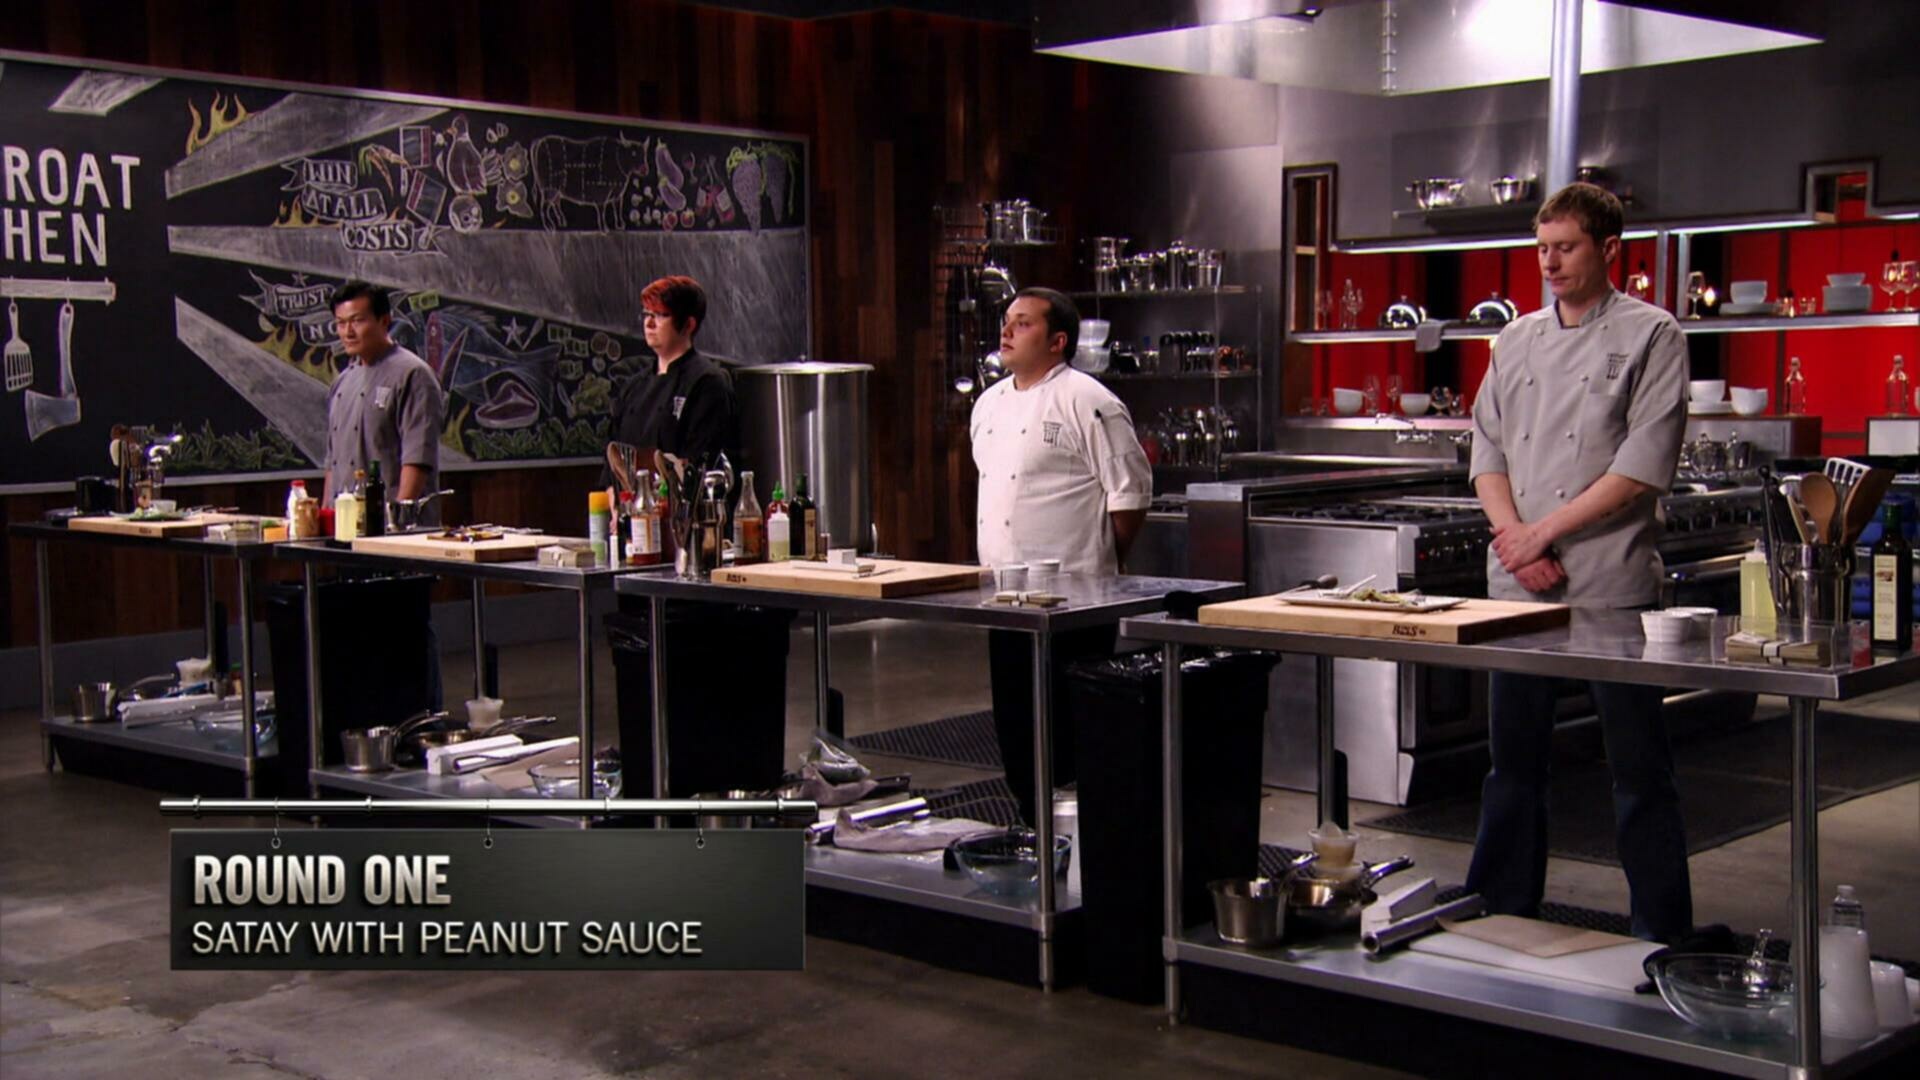 Cutthroat Kitchen S04E05 Welcome to the Jungle 1080p AMZN WEB DL DDP 2 0 H 264 FLUX TGx